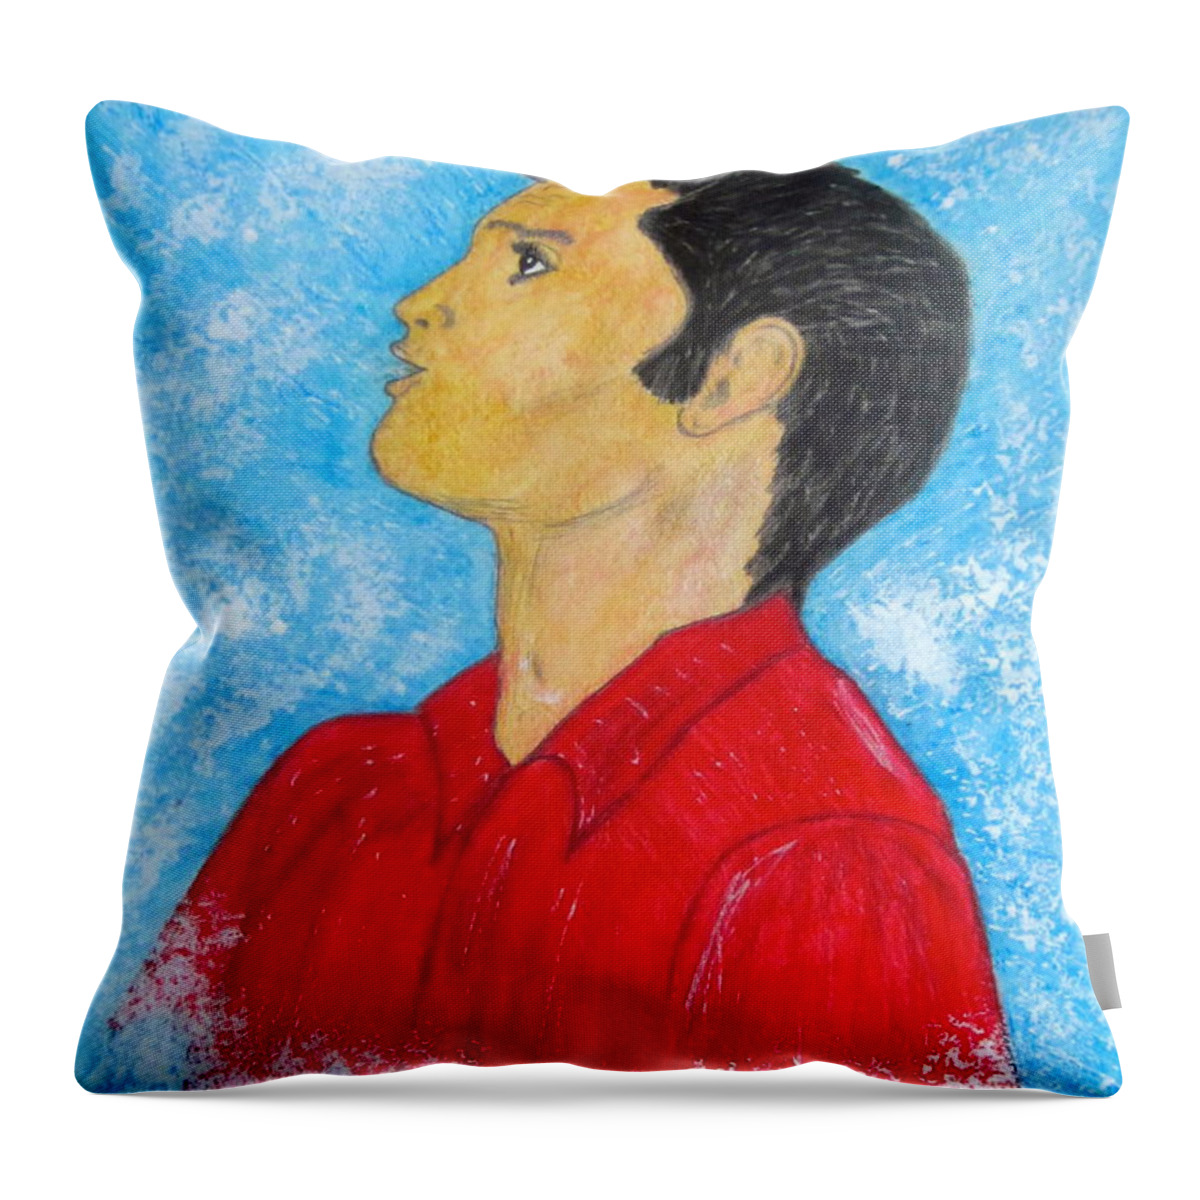 Elvis Presely Throw Pillow featuring the painting Elvis Presley Singing by Kathy Marrs Chandler